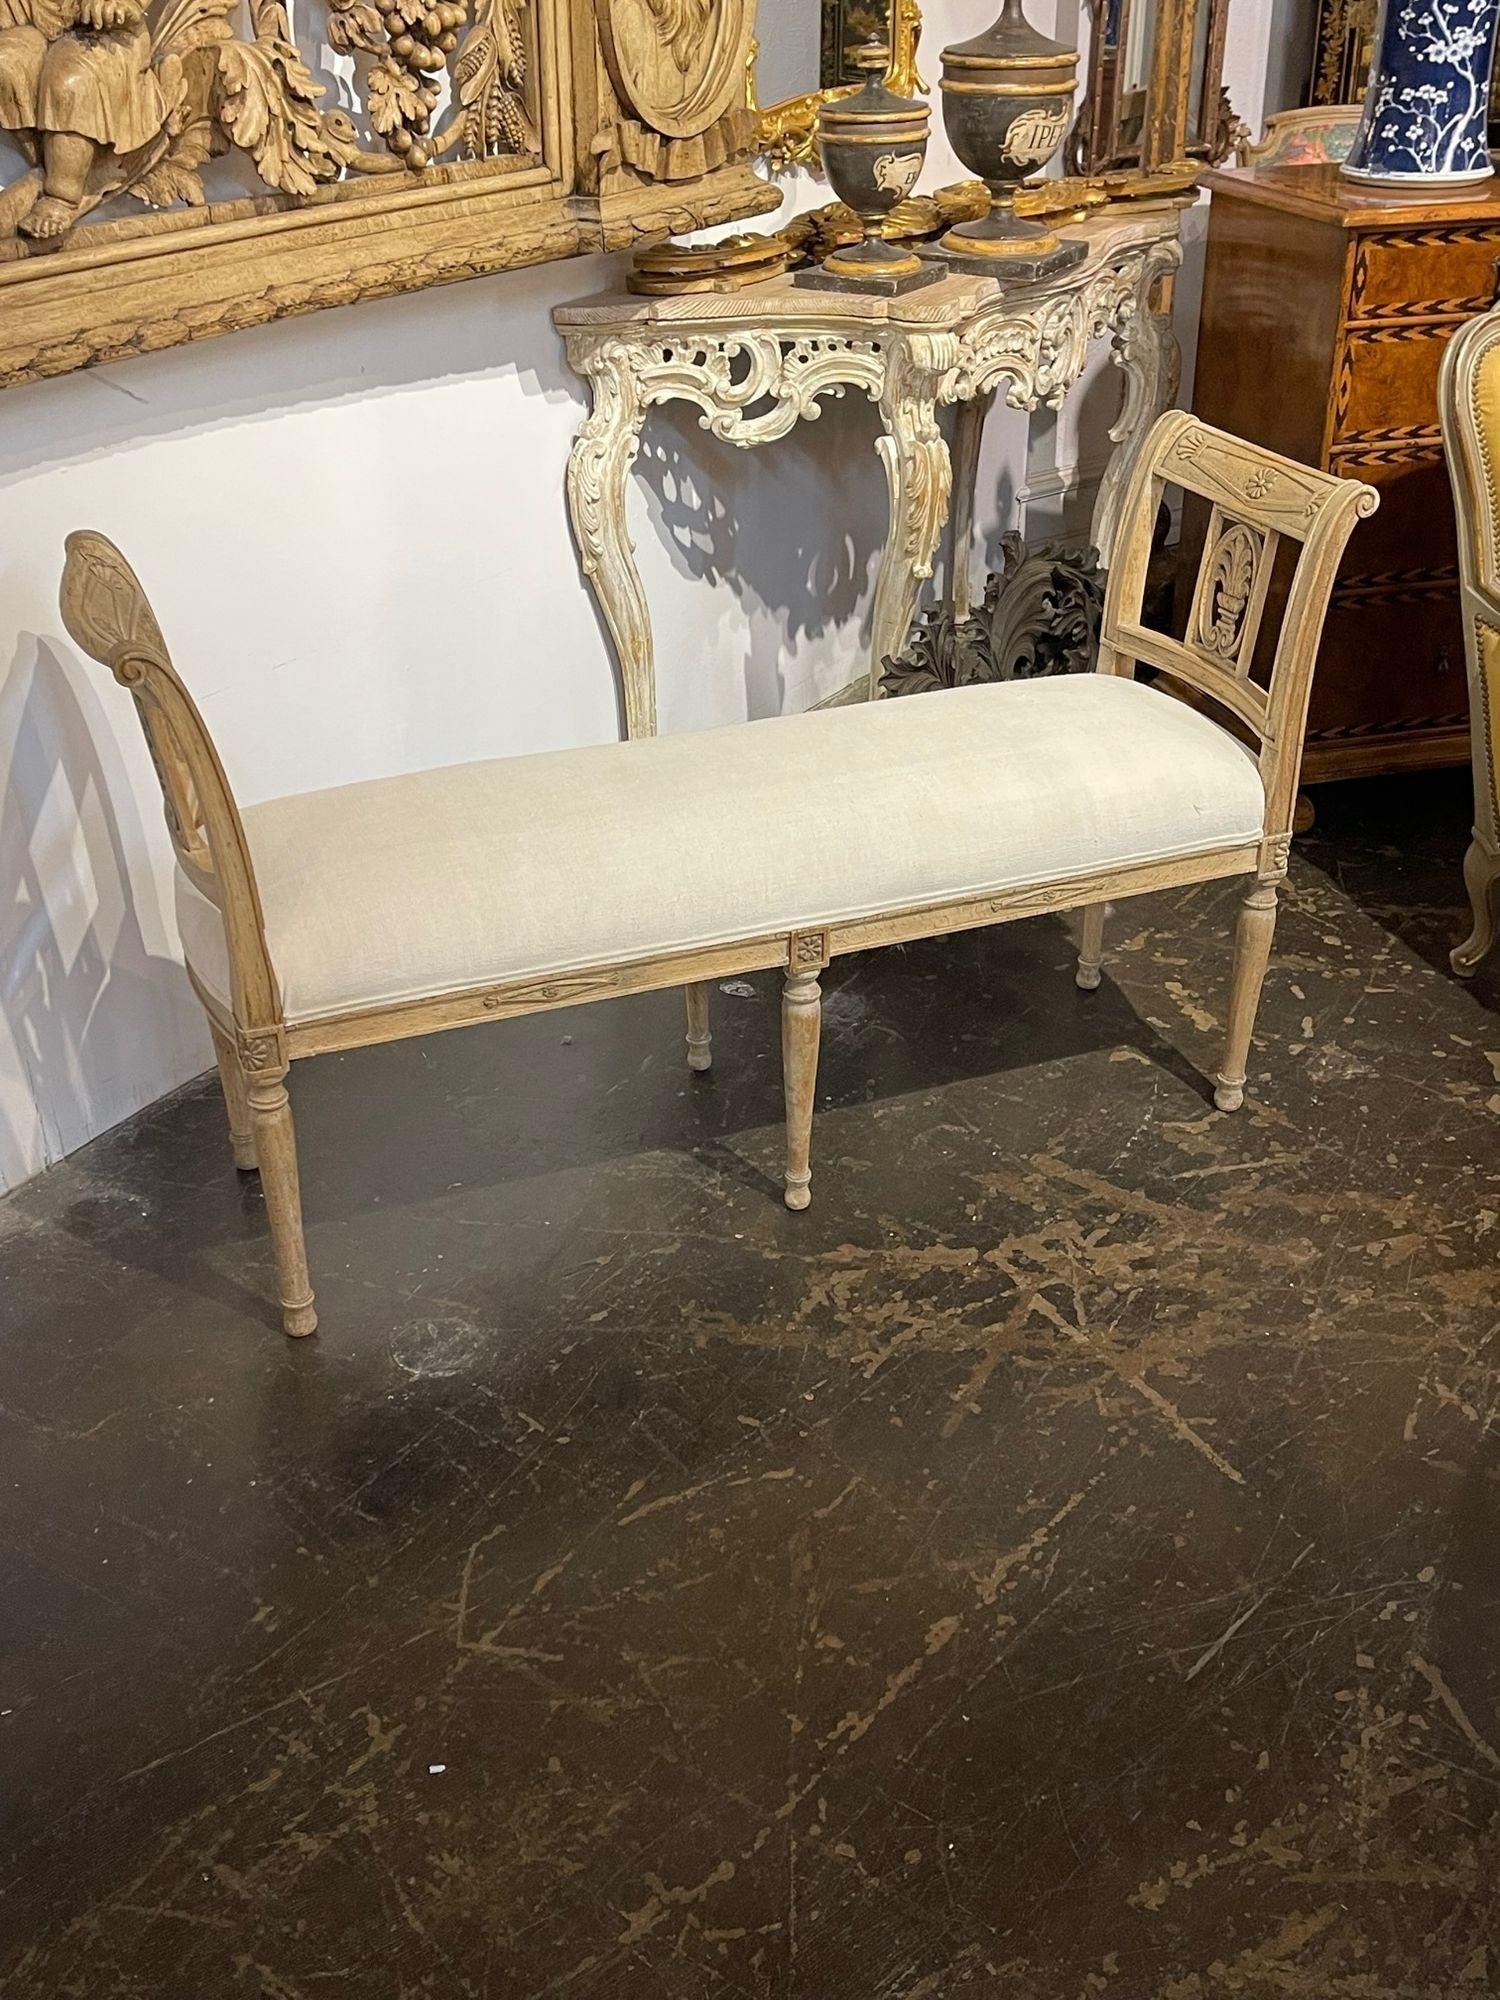 Gorgeous 19th century French Directoire style carved bench with bleached walnut. The piece is upholstered in a lovely creme colored linen upholstery. Very nice!!